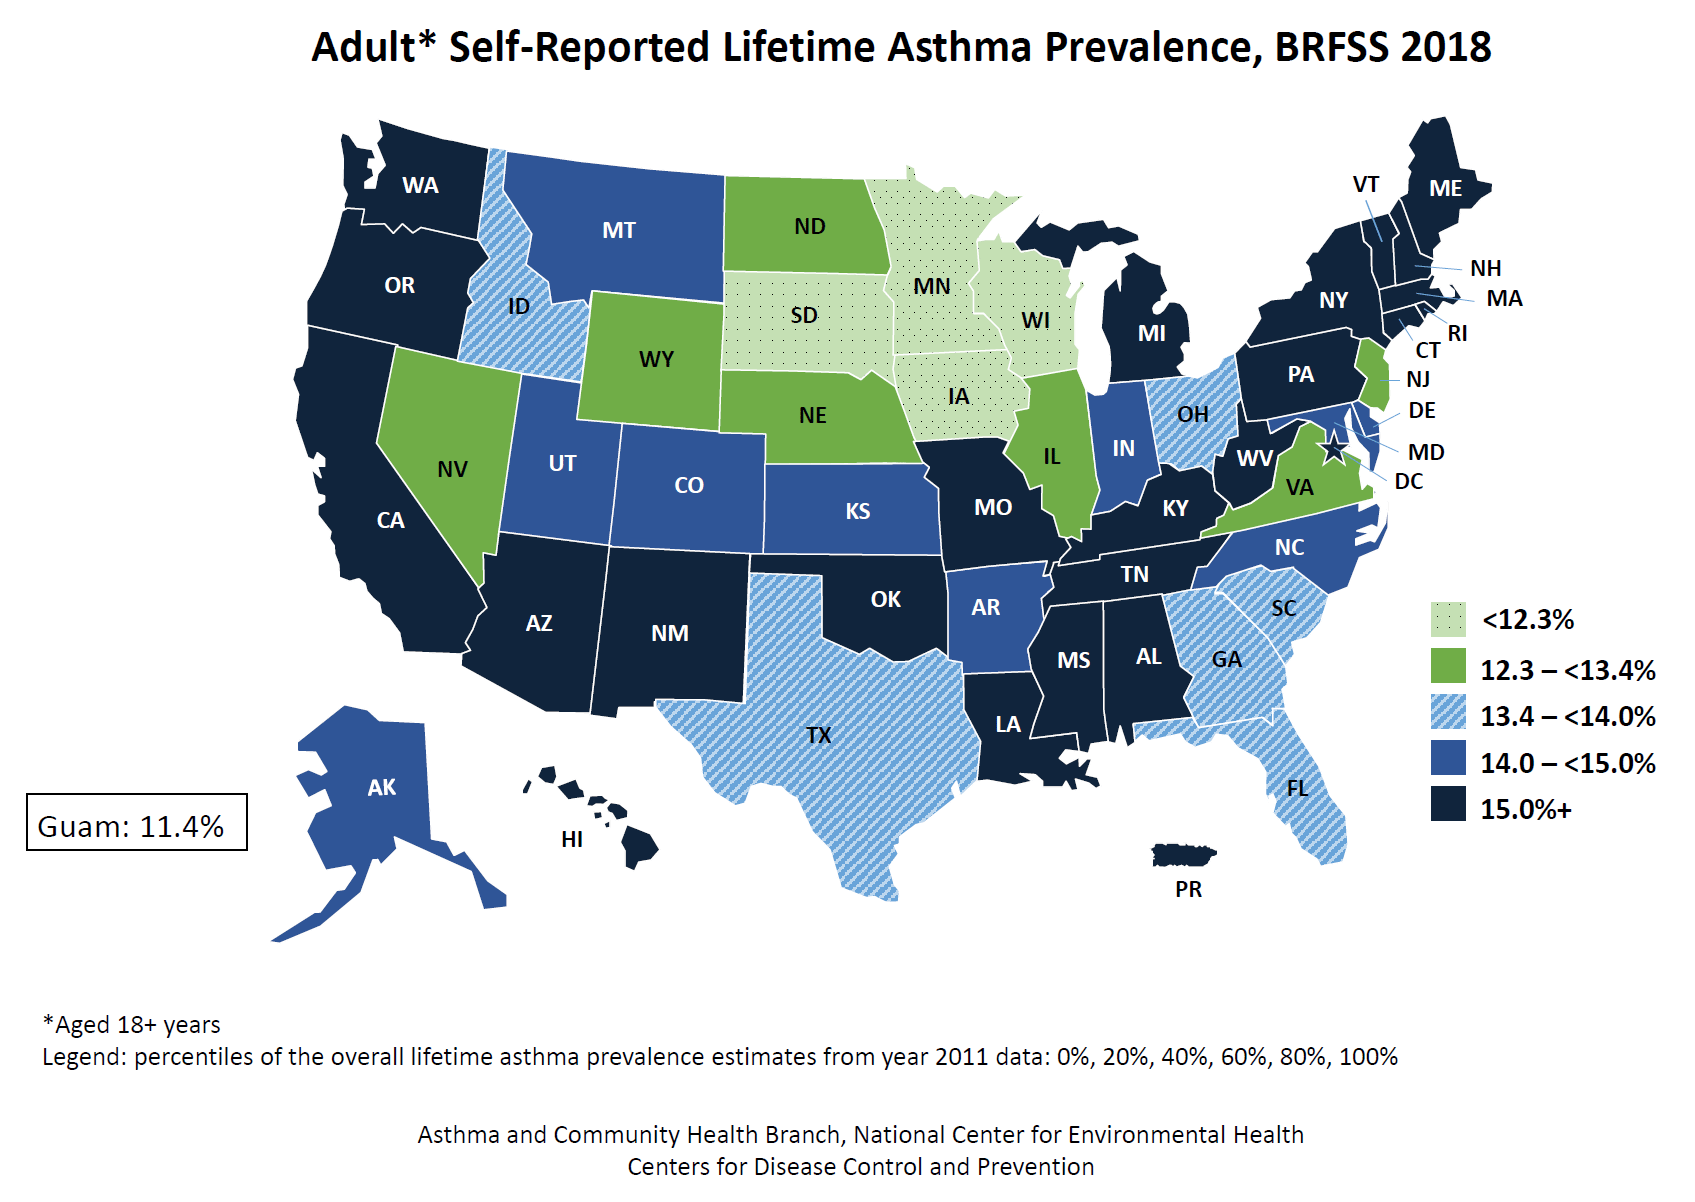 U.S. map showing adult self-reported lifetime asthma prevalence by state for BRFSS 2018